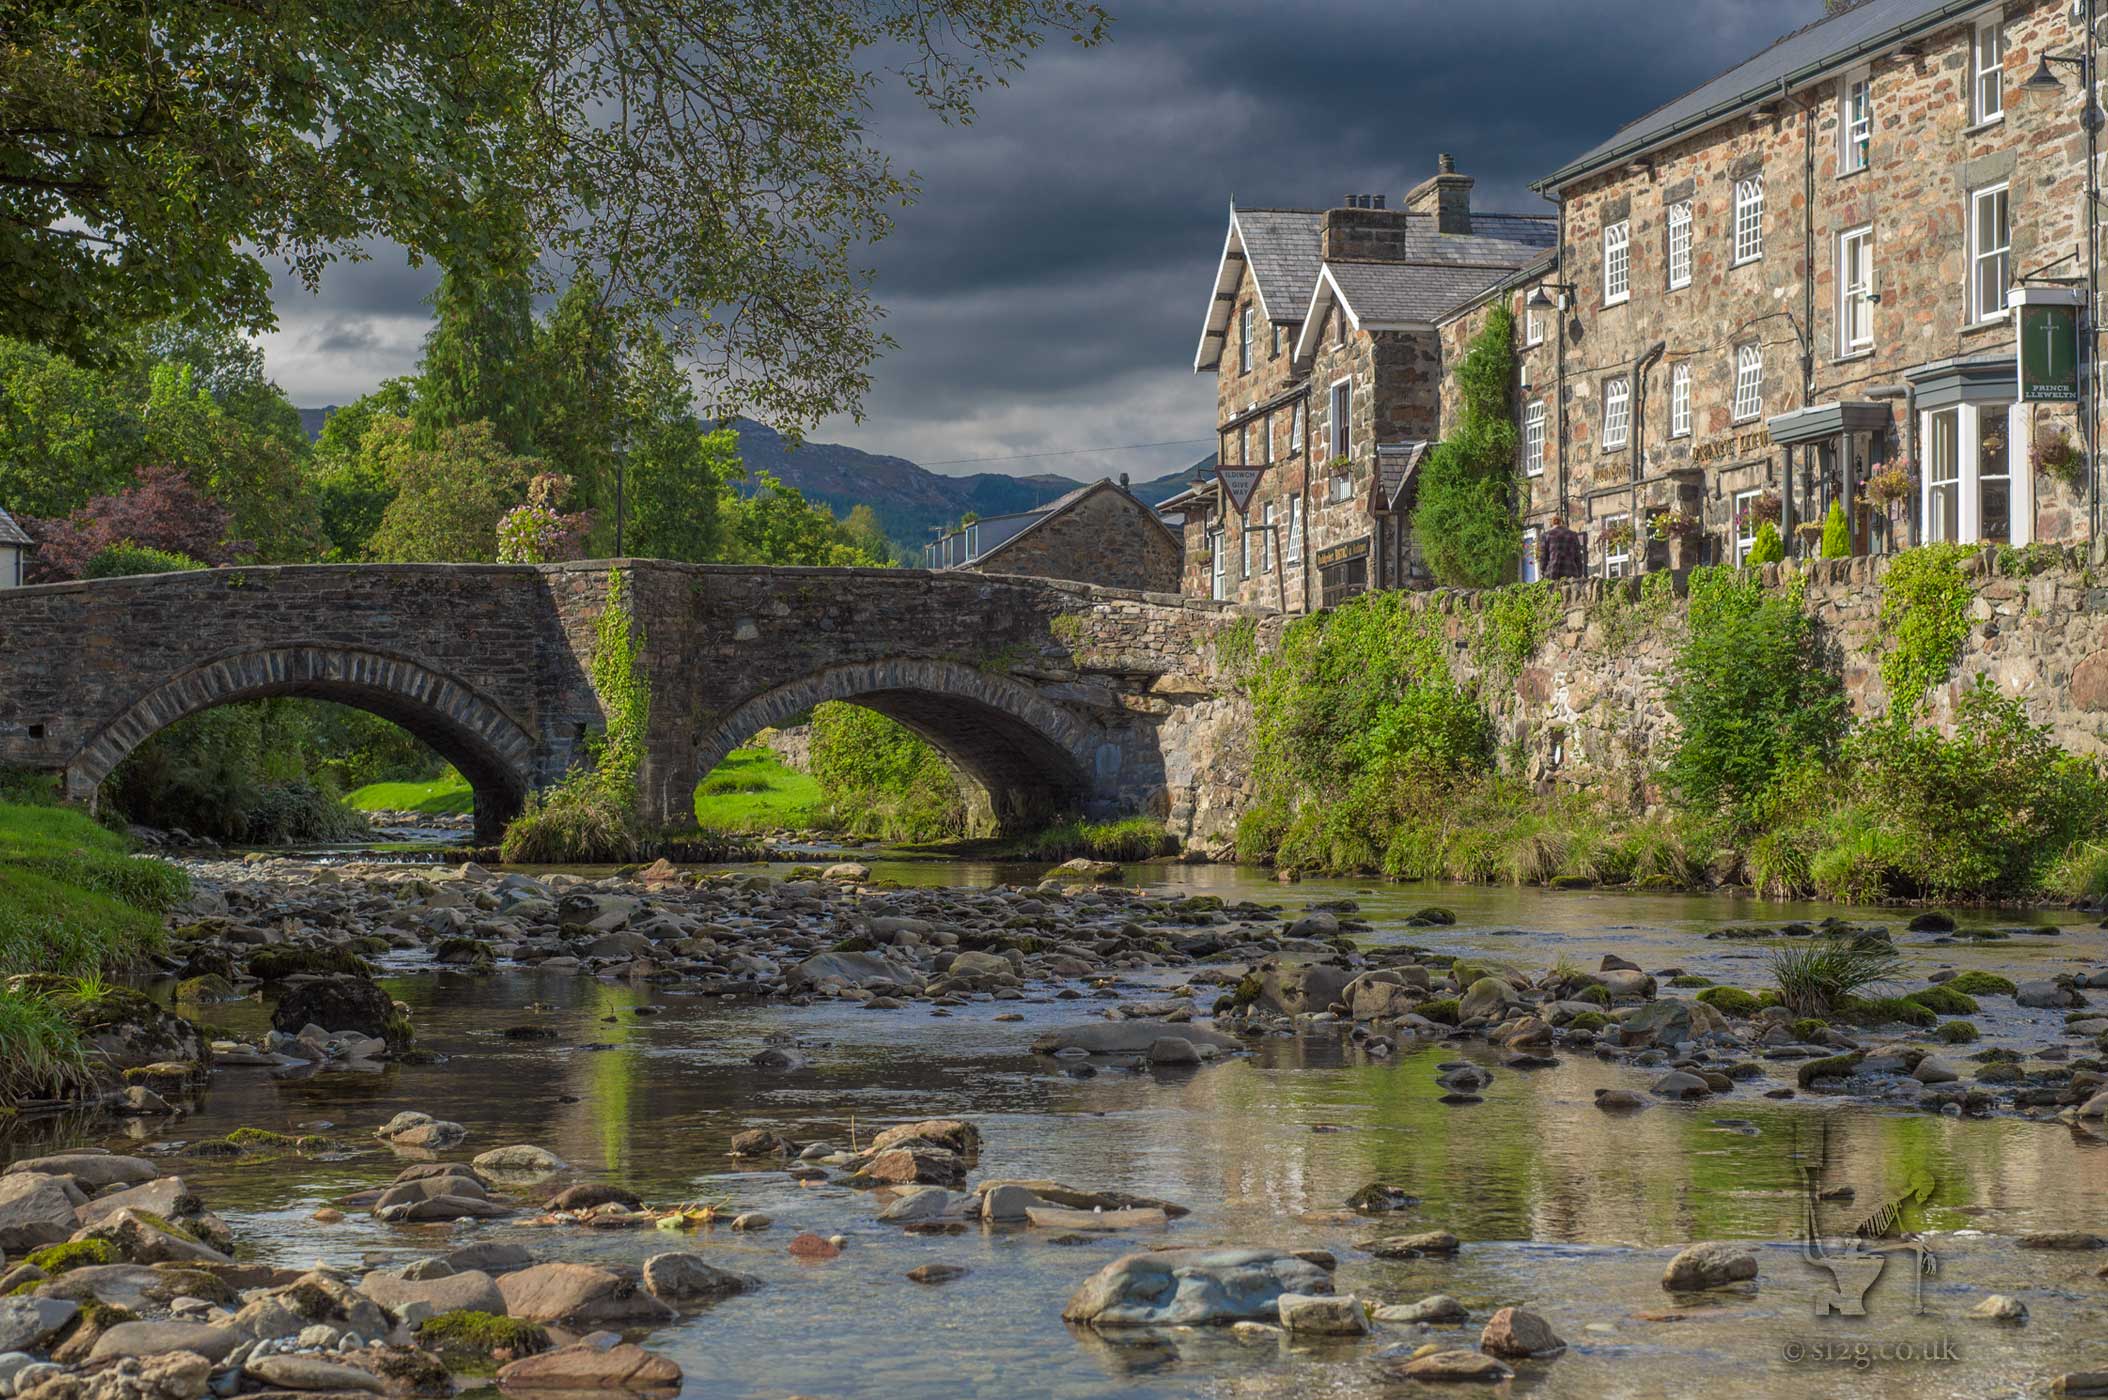 Chocolate Box Village - This picturesque stone bridge and country pub is situated in the village of Beddgelert in Snowdonia, Wales.  Wanting to get an edge over the other photographers milling around that day, I decided to climb over the stone wall paddle about in the river to get that chocolate box image of serenity with no cars or people in shot.